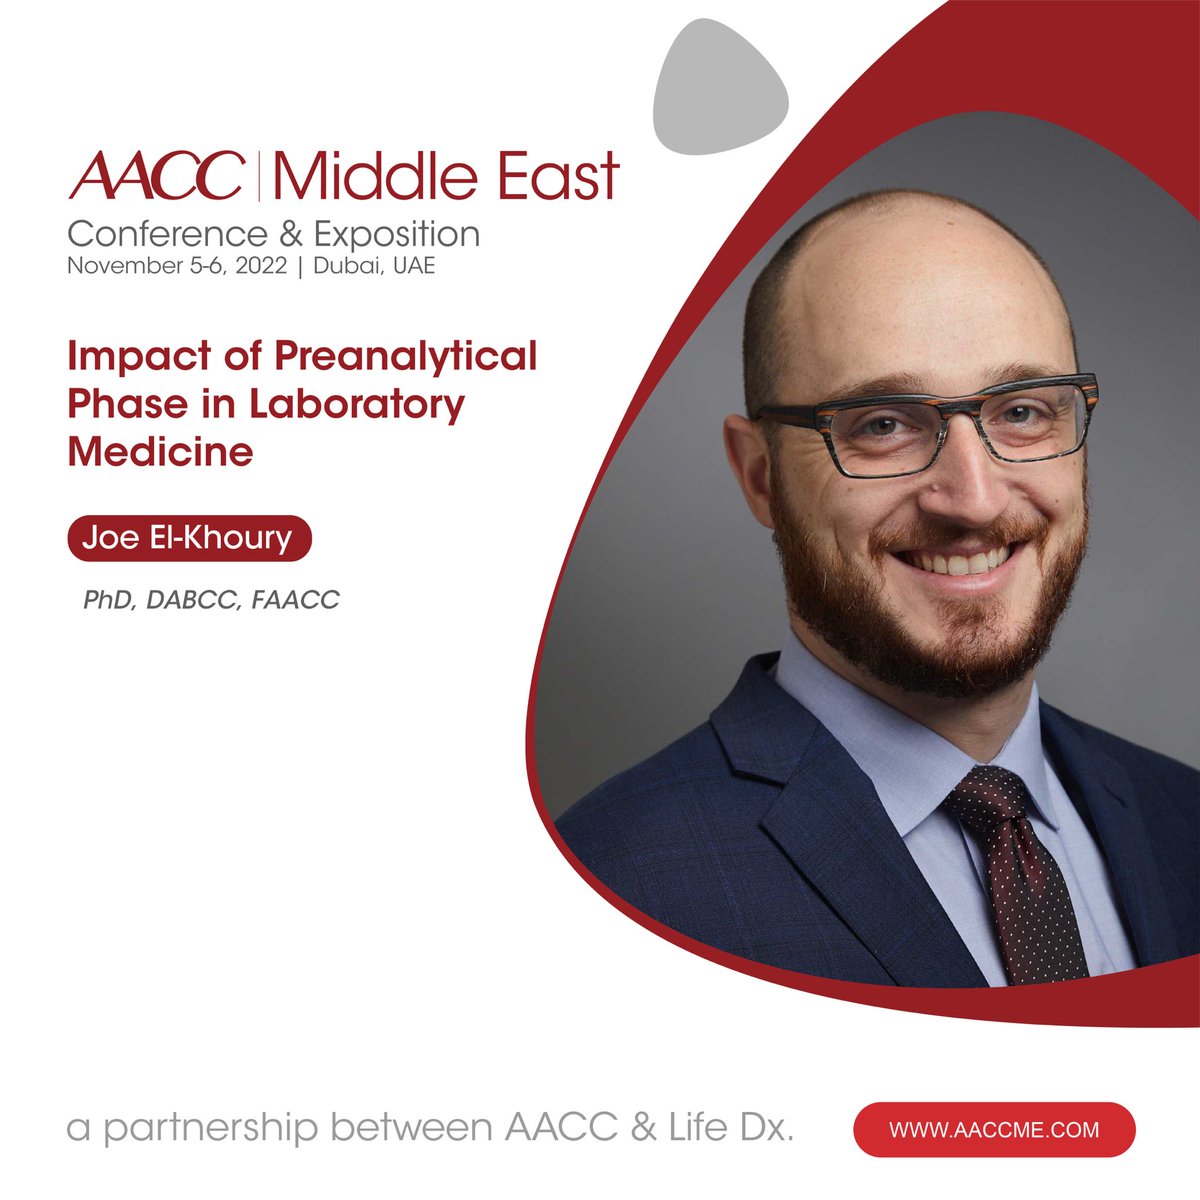 The preanalytical phase is a crucial part of the testing process. Dr. Joe El-Khoury will clearly define the various stages preceding analysis and will reflect on best practices to ensure minimum errors and optimum accuracy!